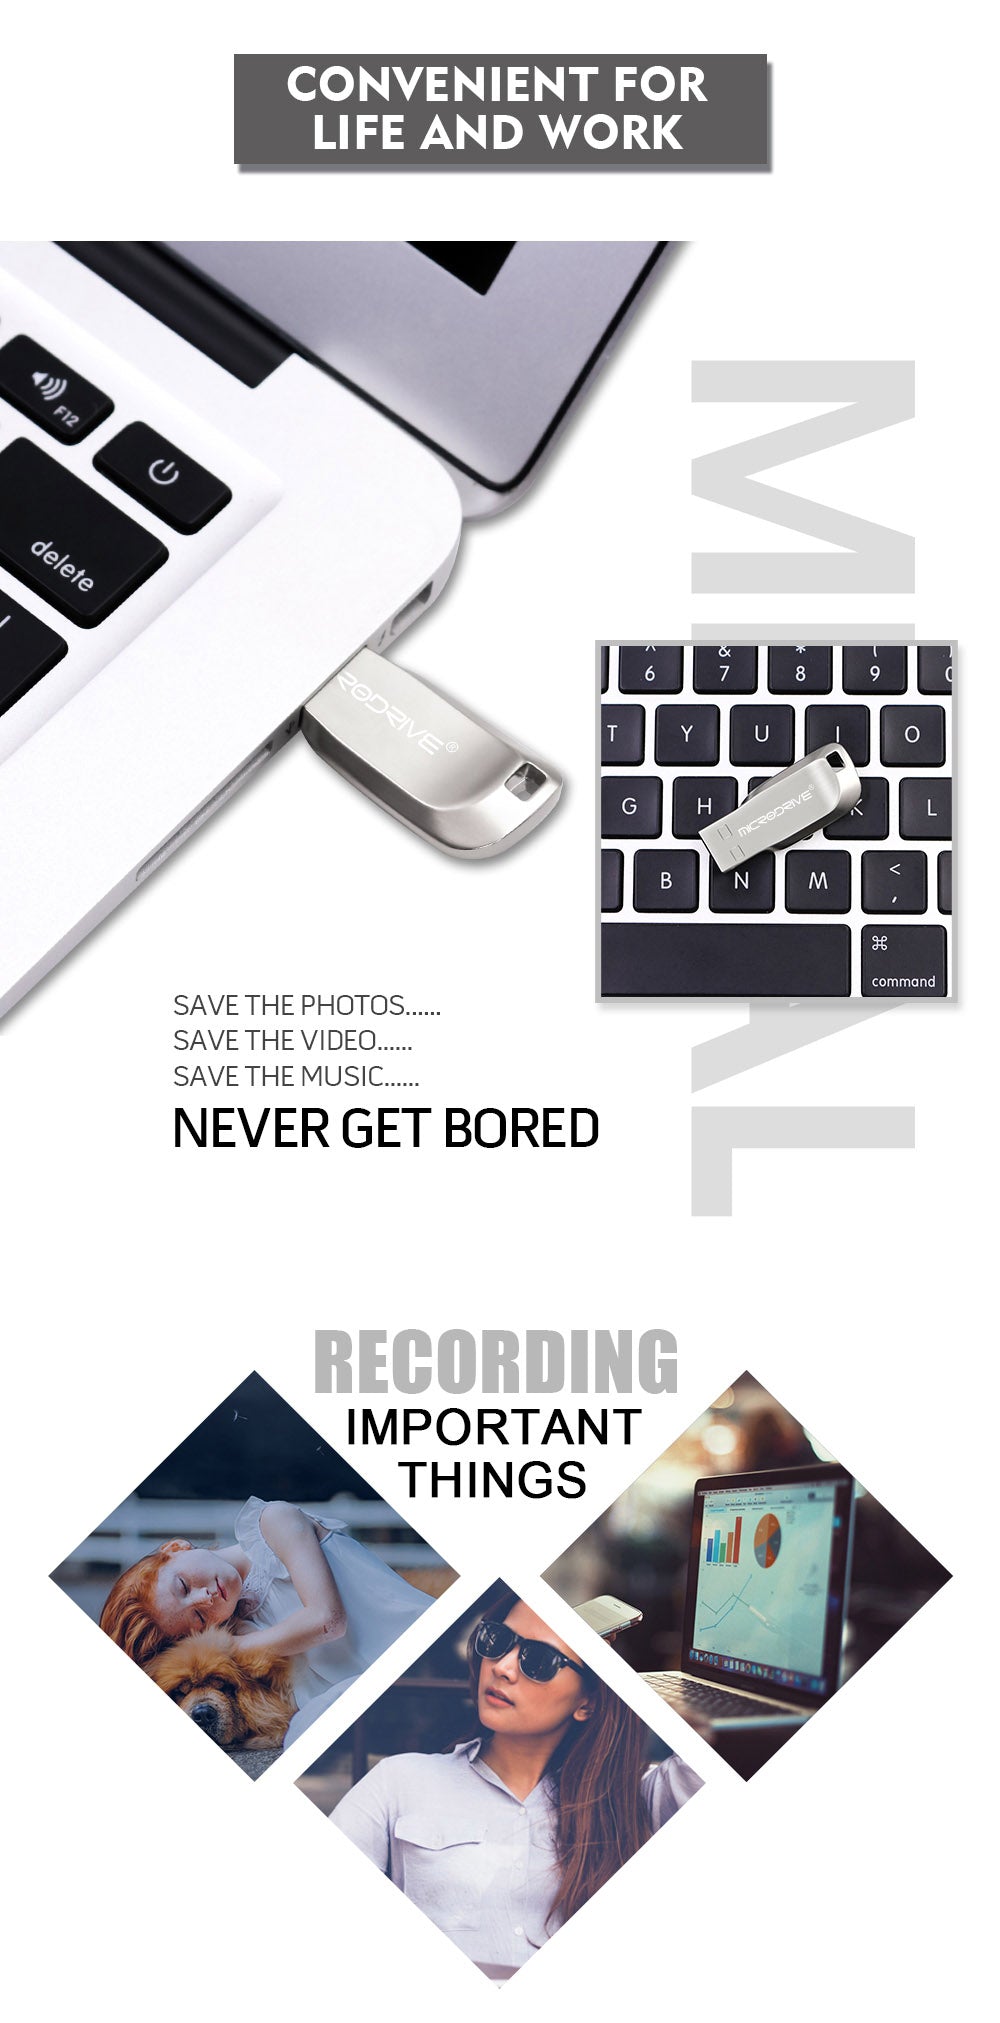 pendrive usb key features